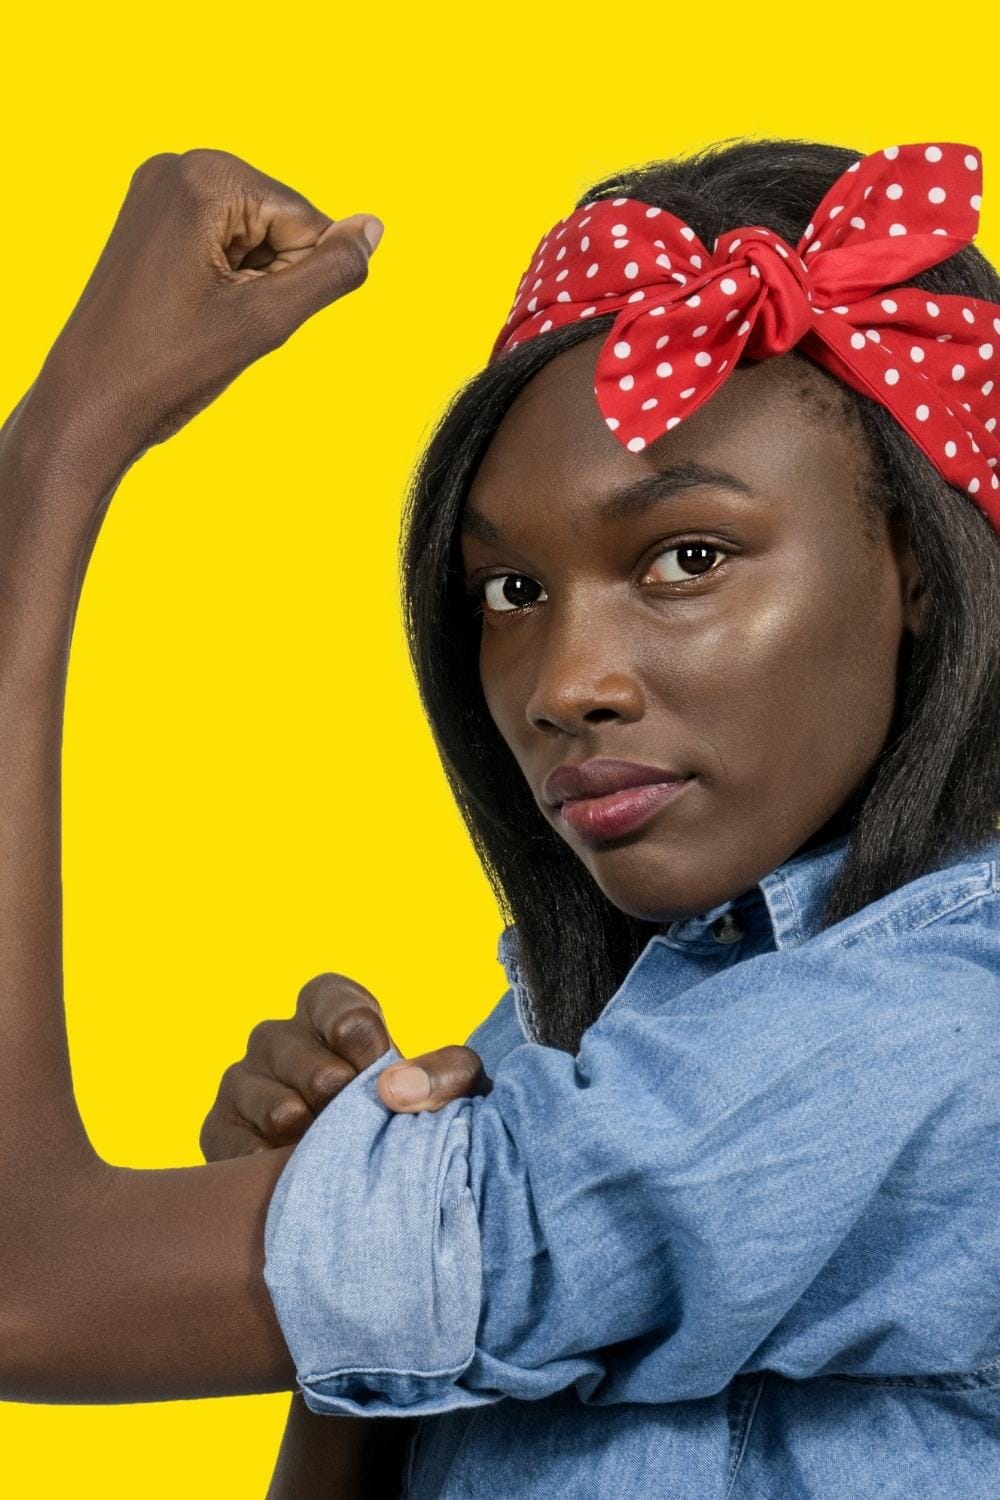 Woman flexes her bicep while wearing a denim shirt and red bandana.